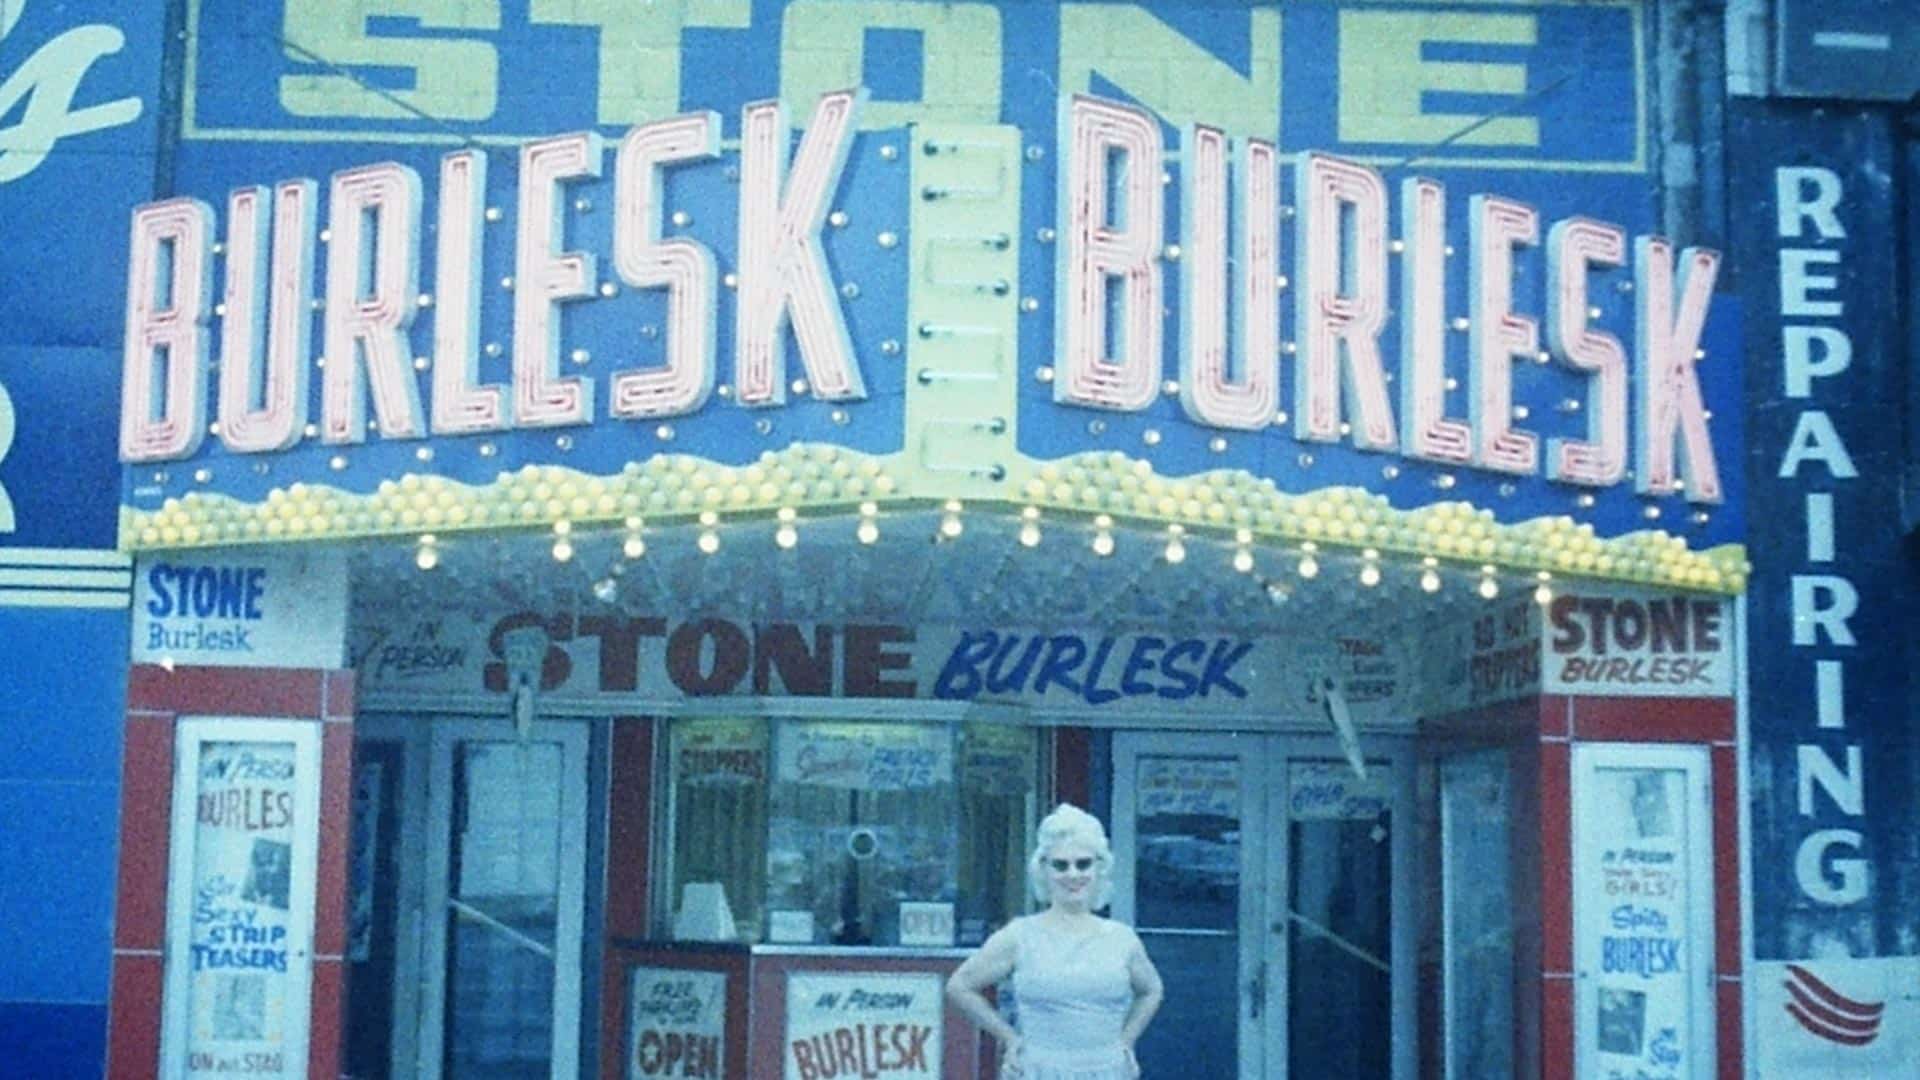 A Night at the Stone Burlesk